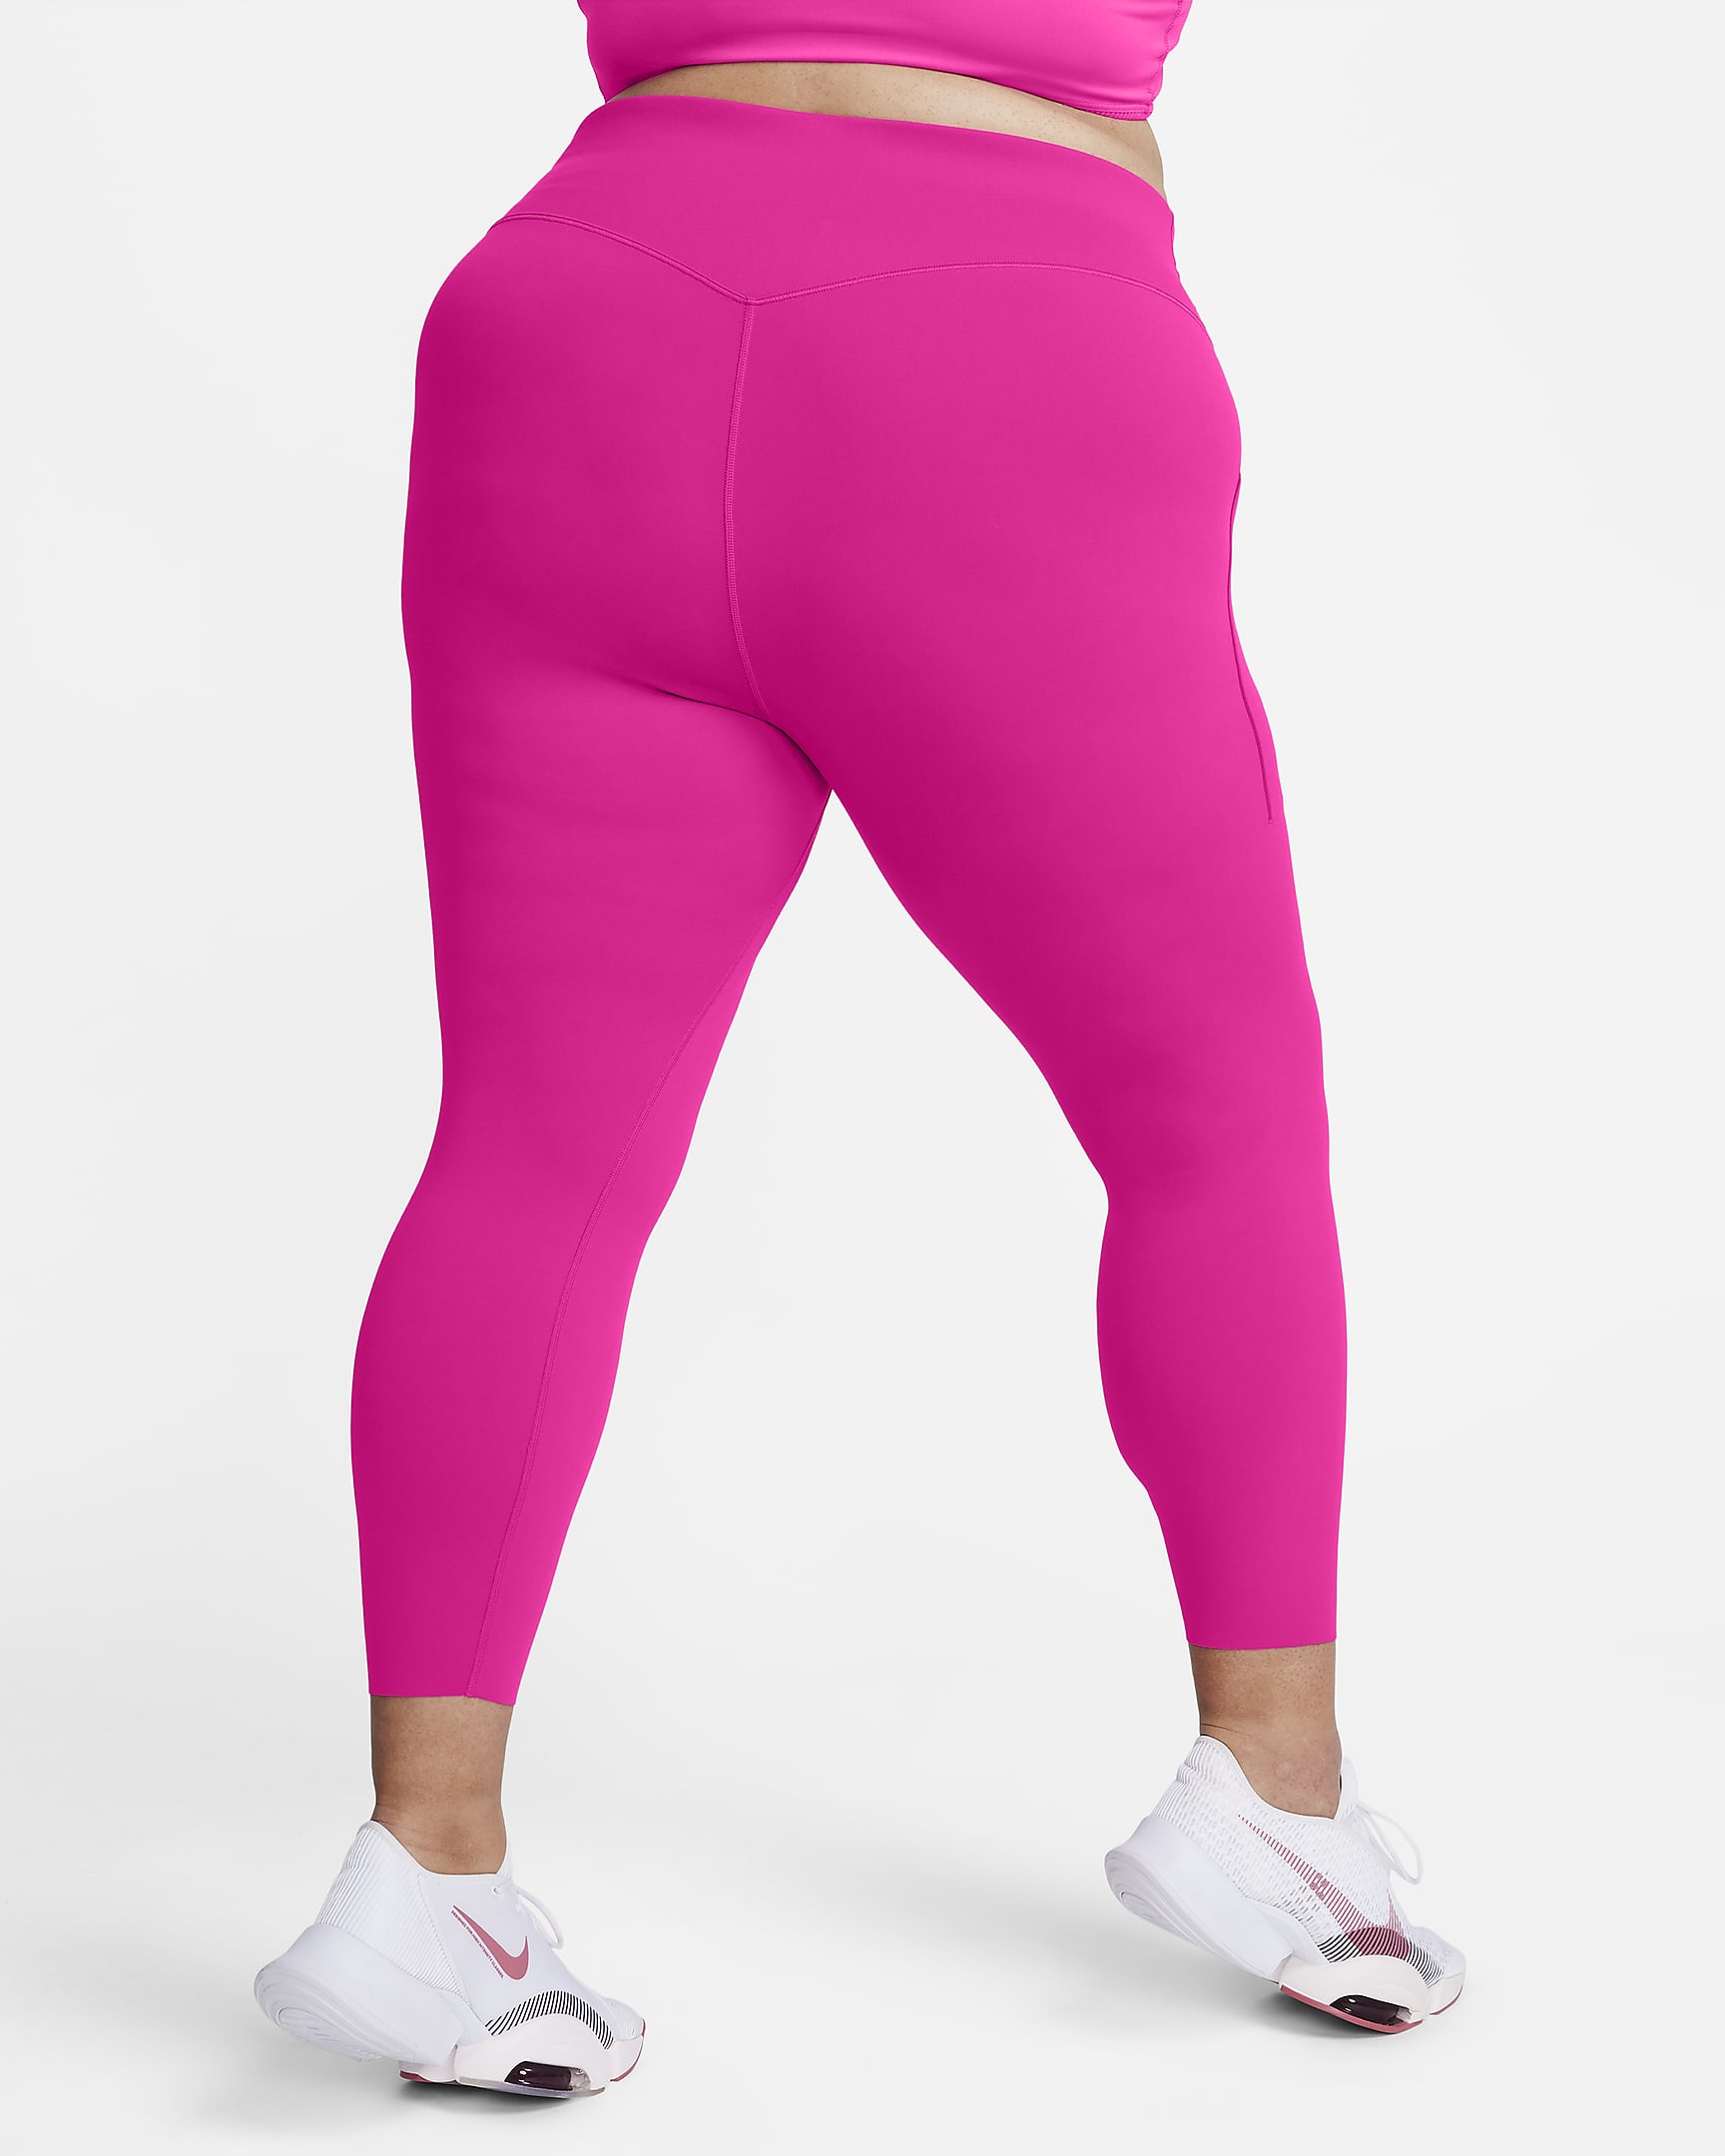 Nike Universa Women's Medium-Support High-Waisted 7/8 Leggings with Pockets (Plus Size) - Fireberry/Black